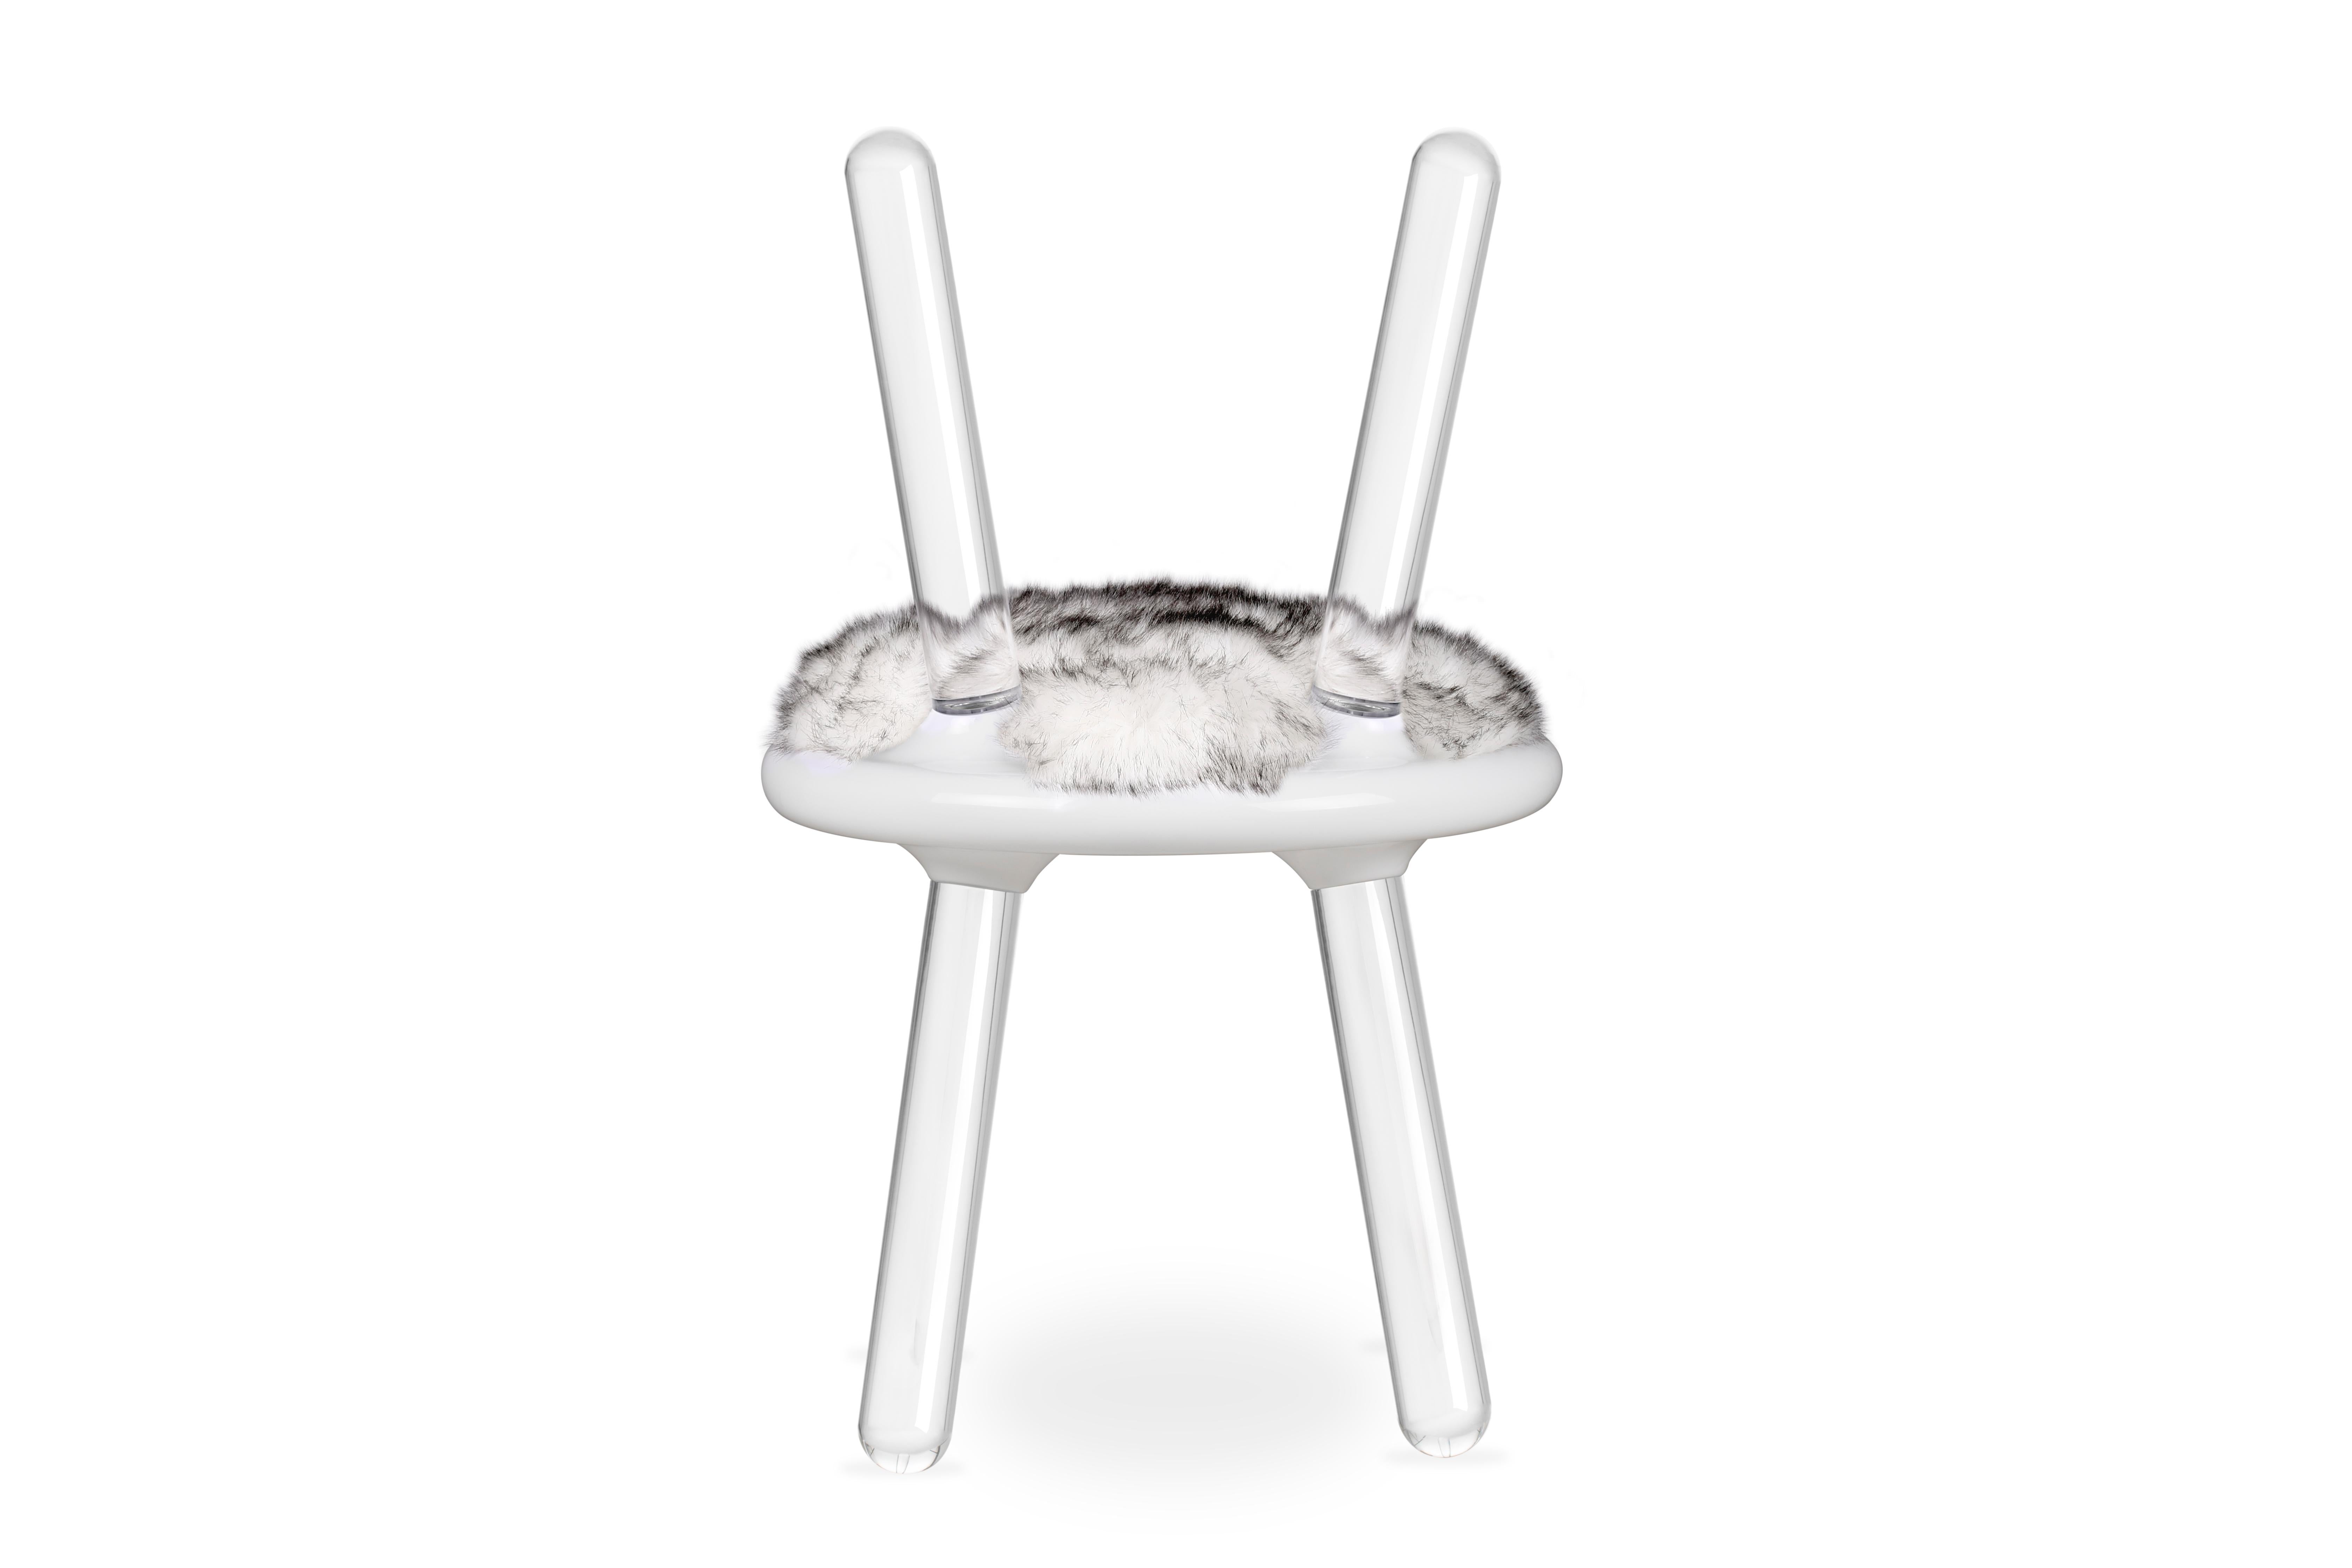 Portuguese Illusion White Bear Chair in Acrylic with Fur Seat by Circu Magical Furniture For Sale